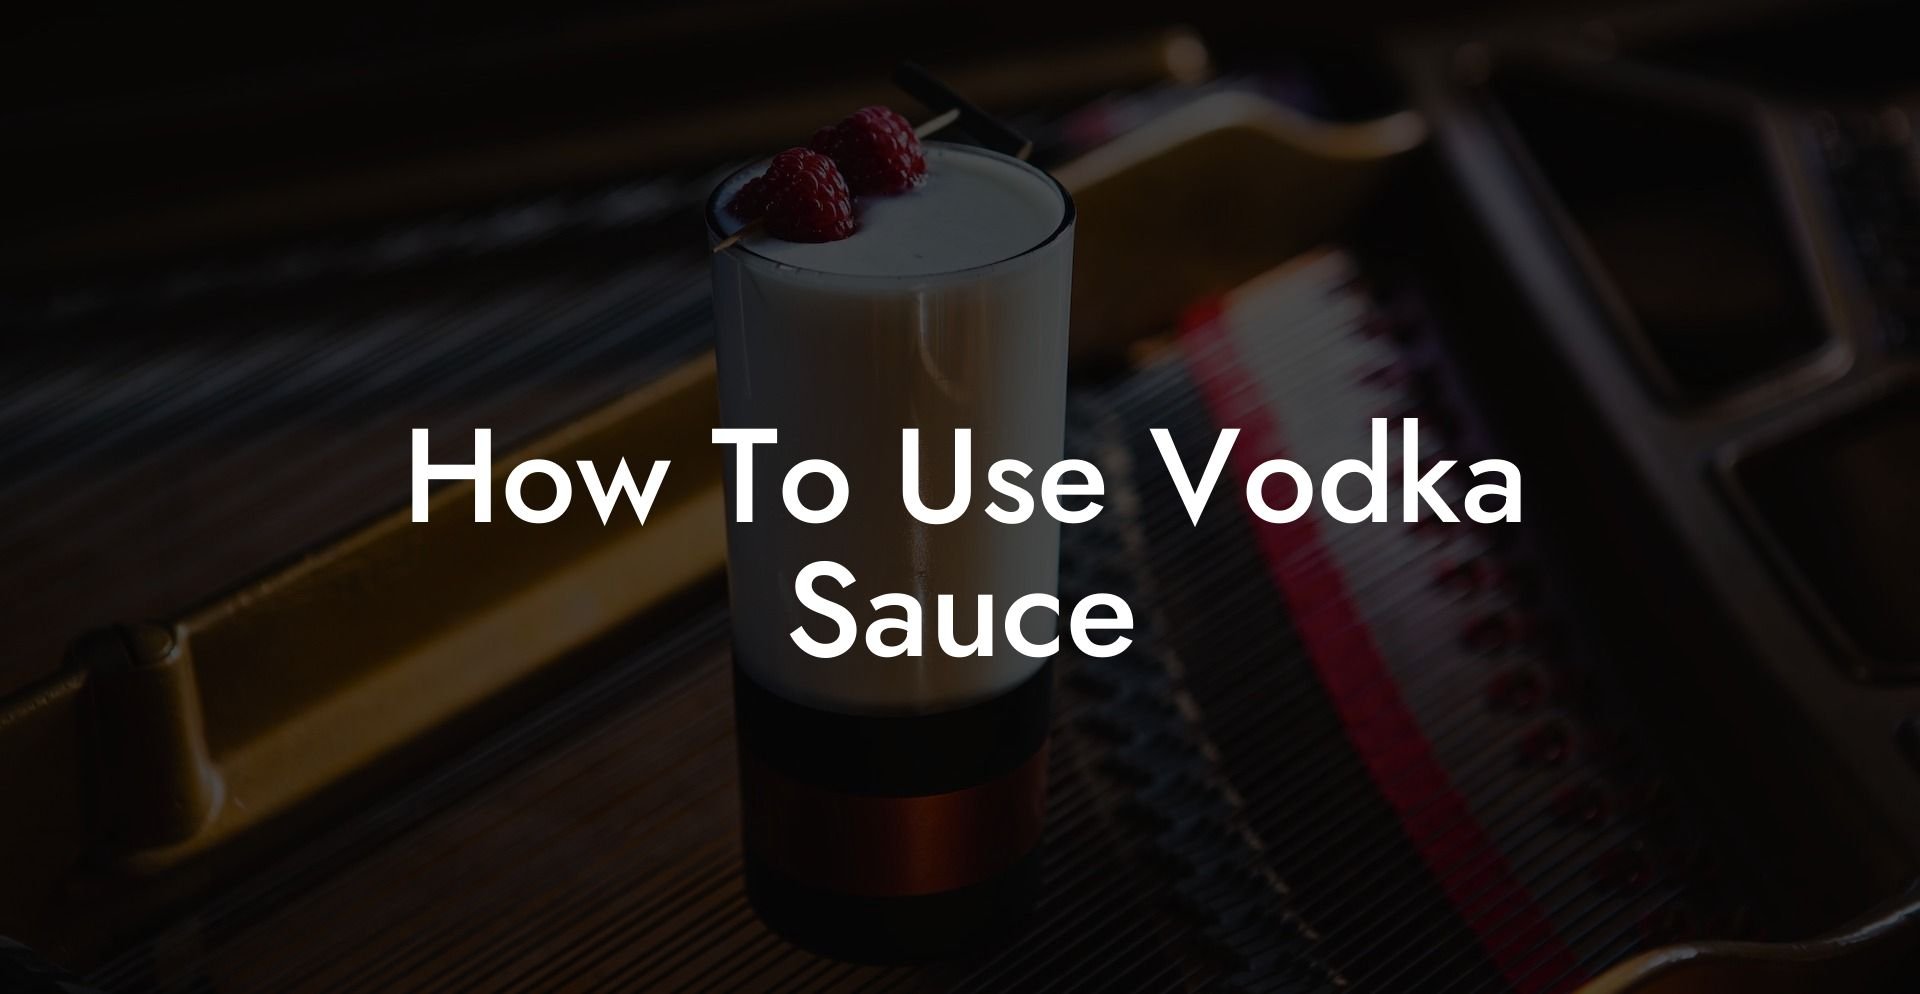 How To Use Vodka Sauce